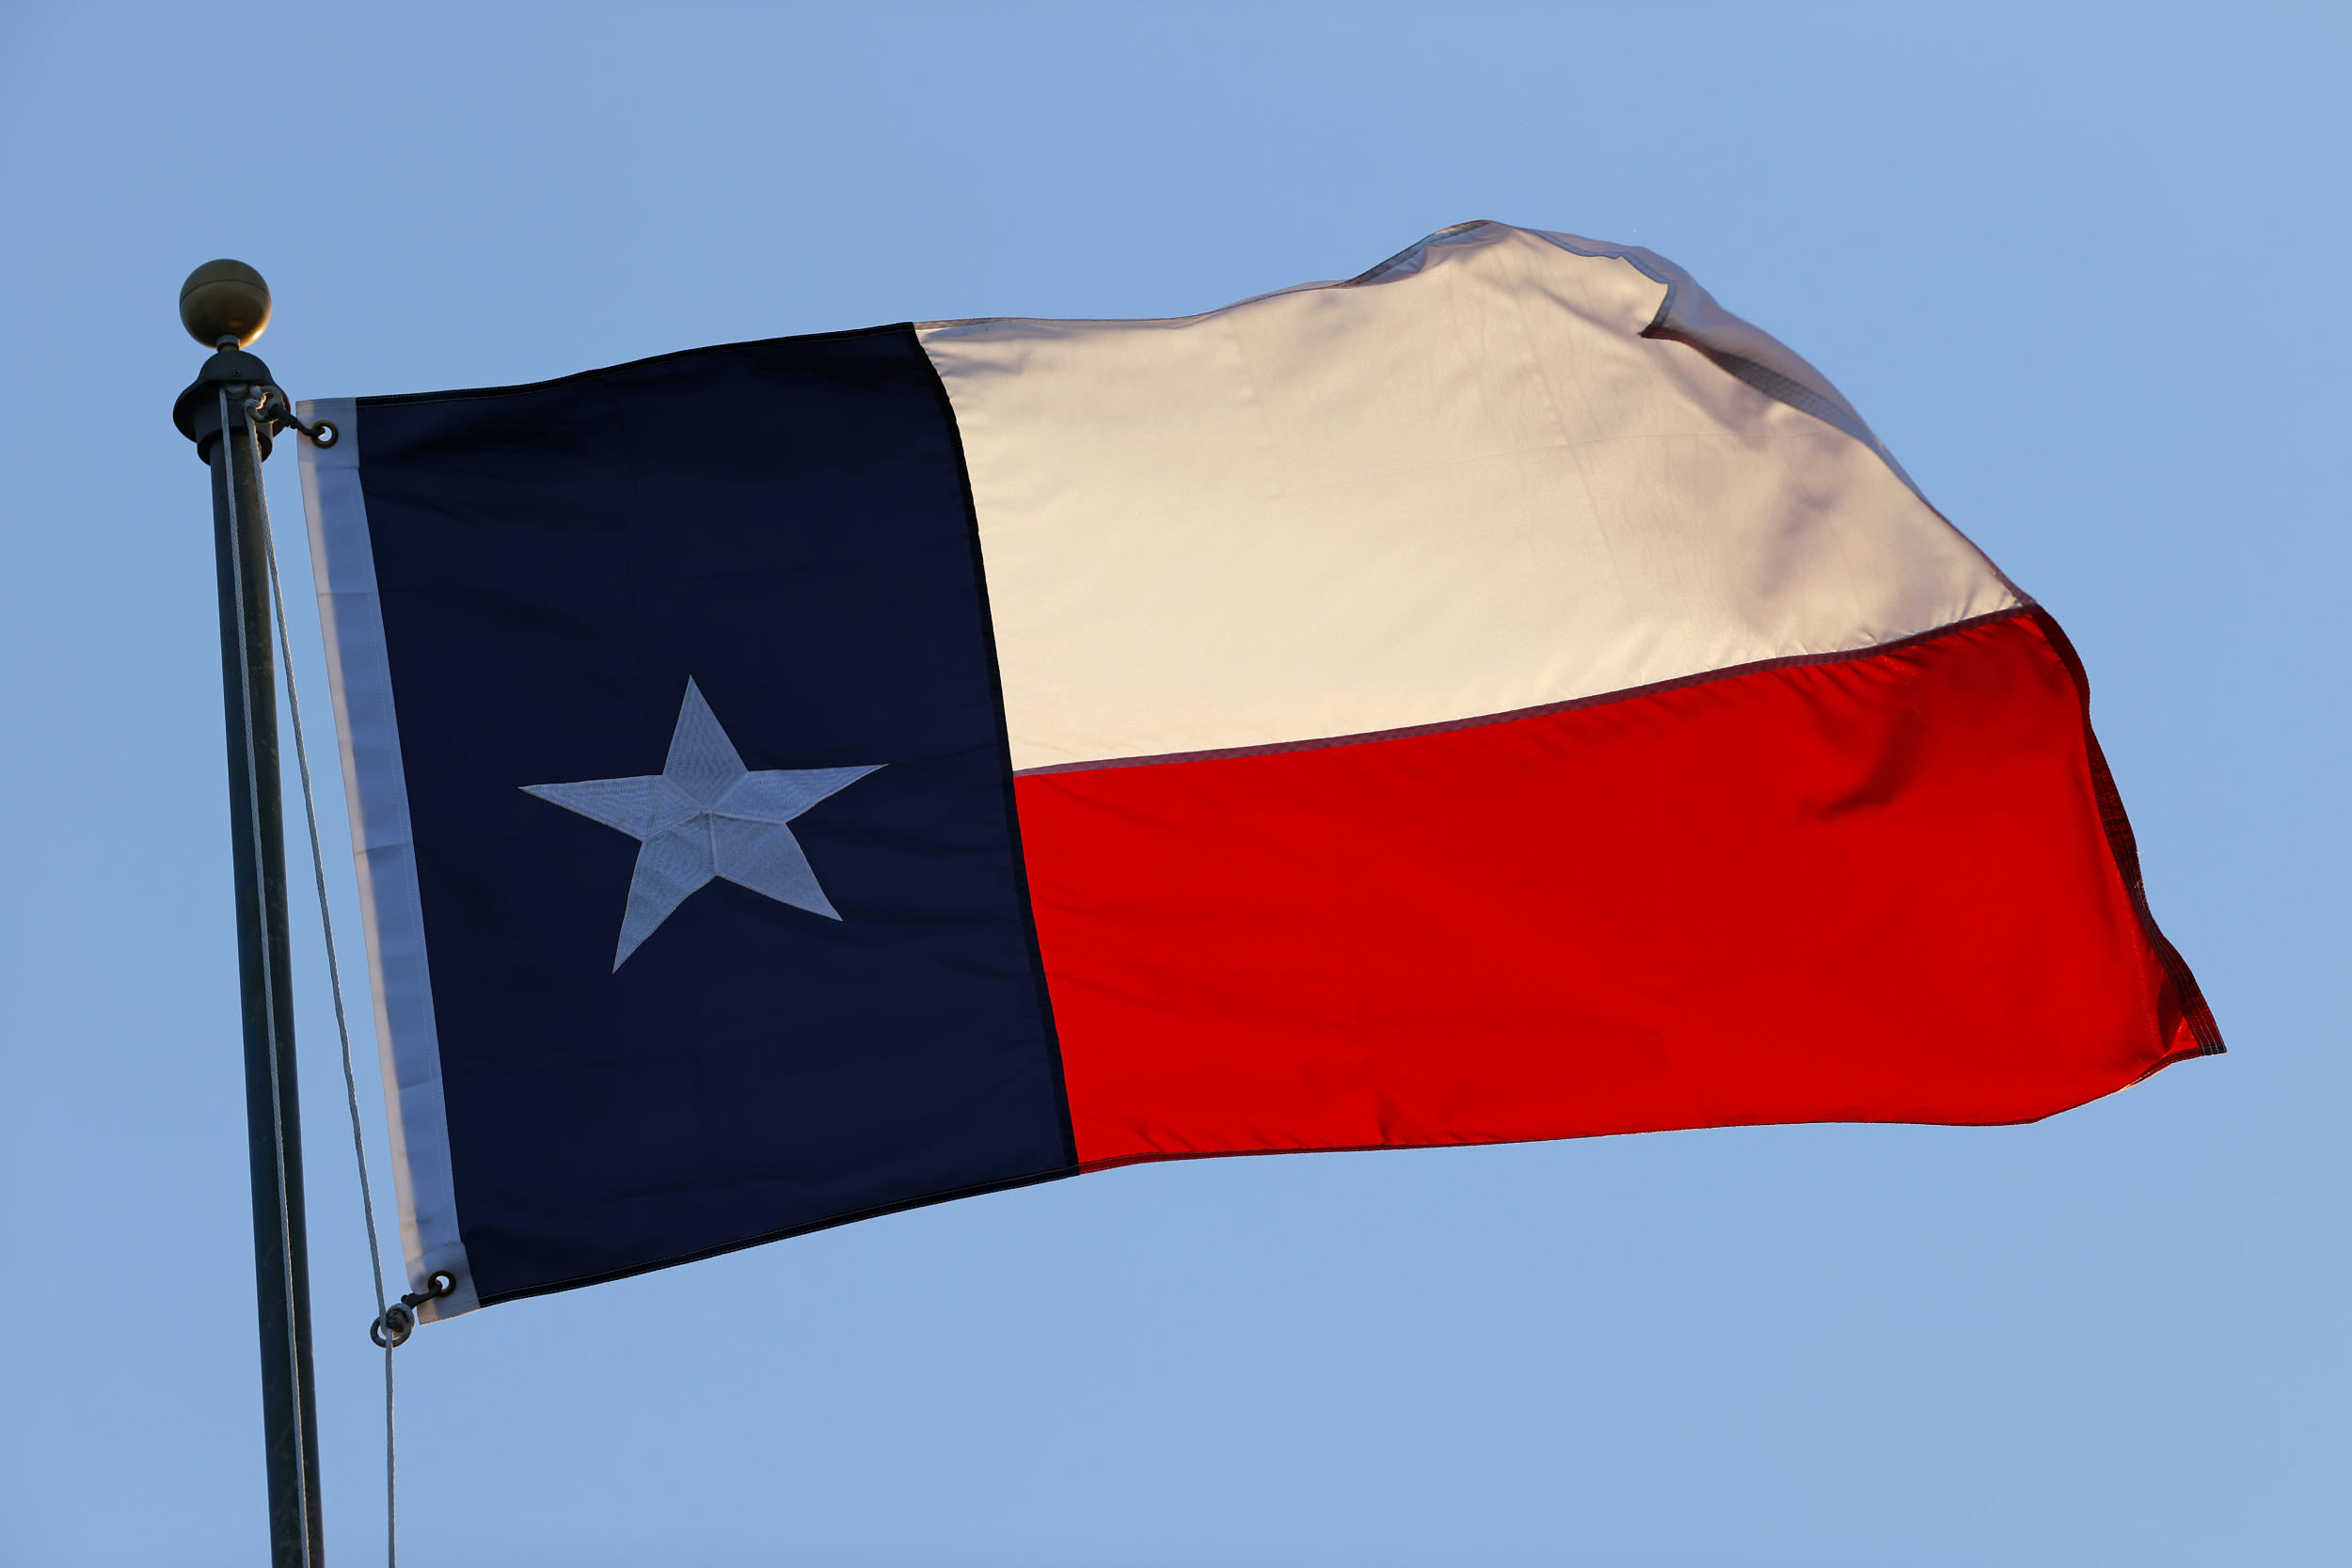 Texas nationalists hail new independence movements: 'Expect to see more'